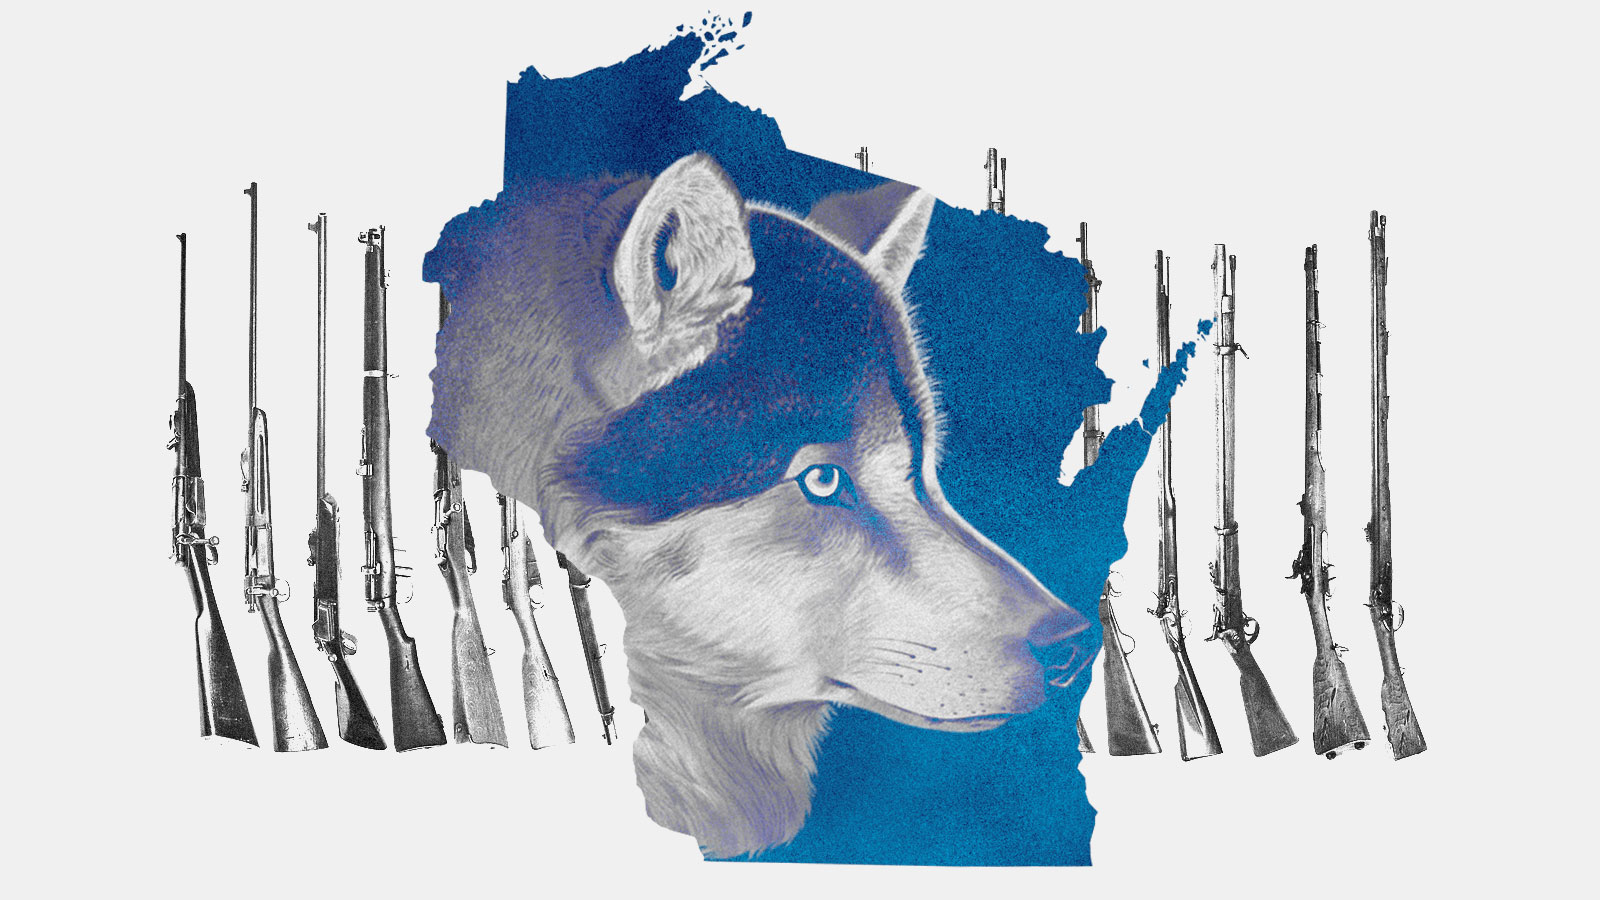 Collage: wolf illustration inside of the silhouette of Wisconsin with hunting rifles in the background